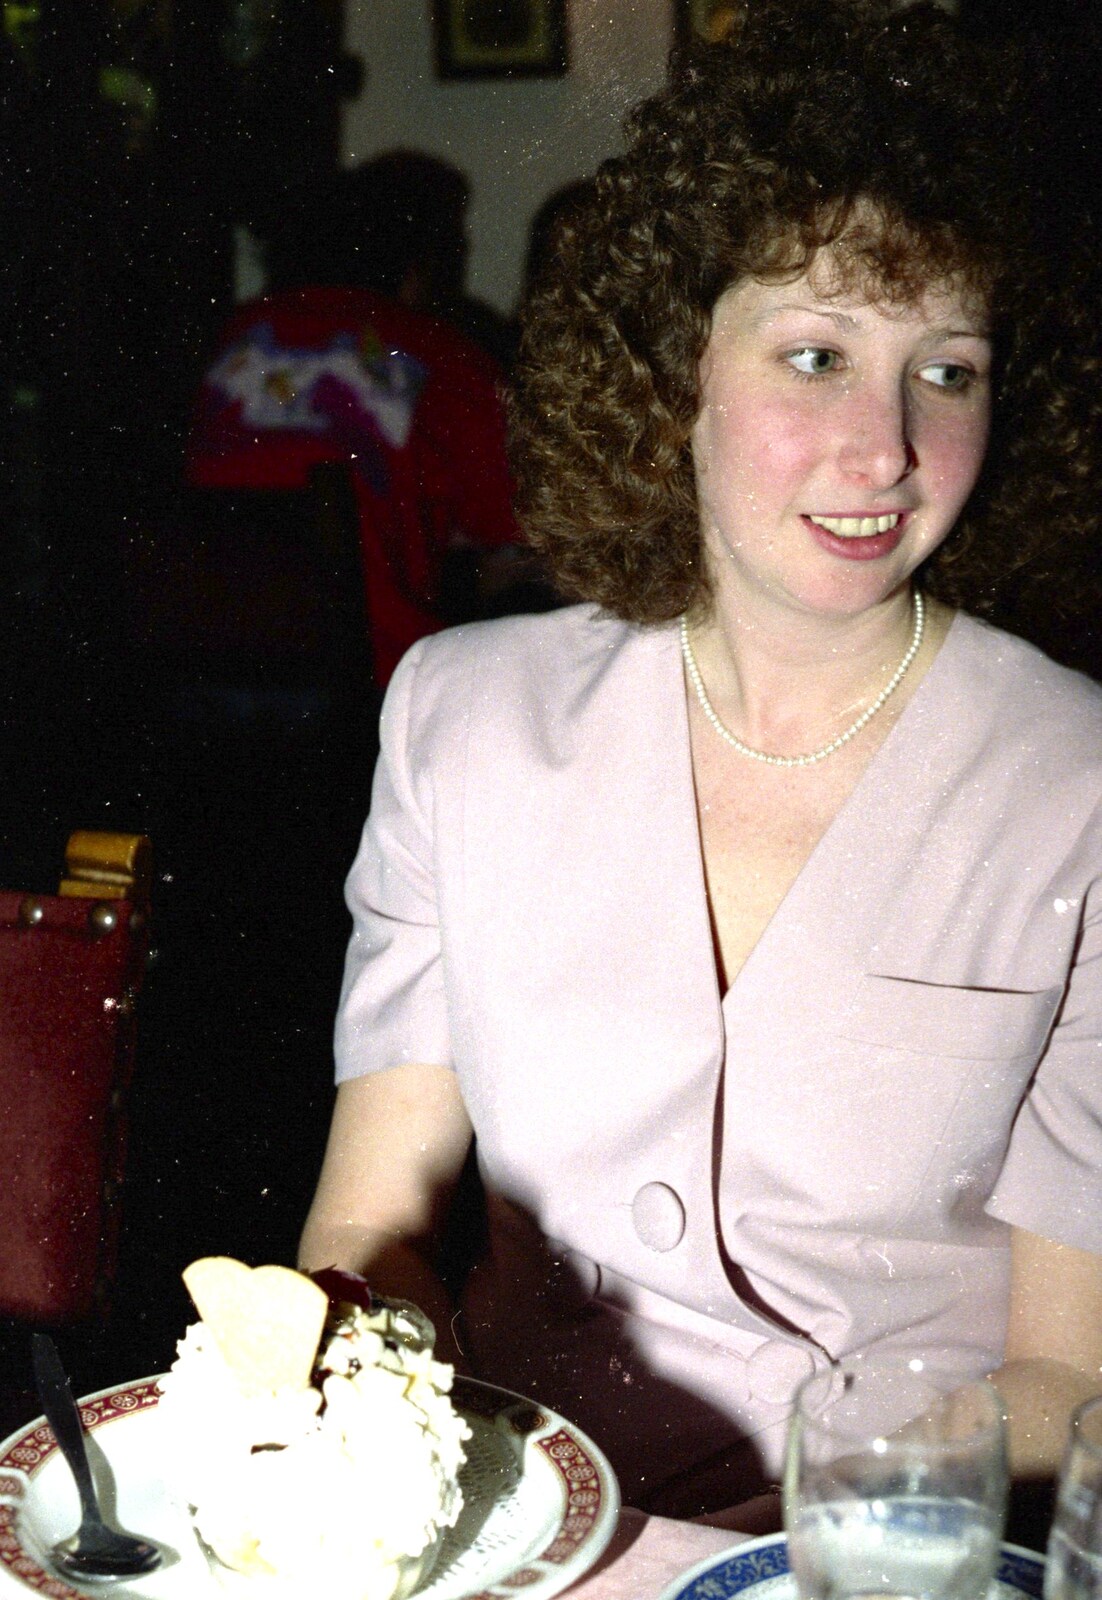 Allison with some pudding from Bonfire Night and Printec at the Stoke Ash White Horse, Suffolk - 5th November 1991